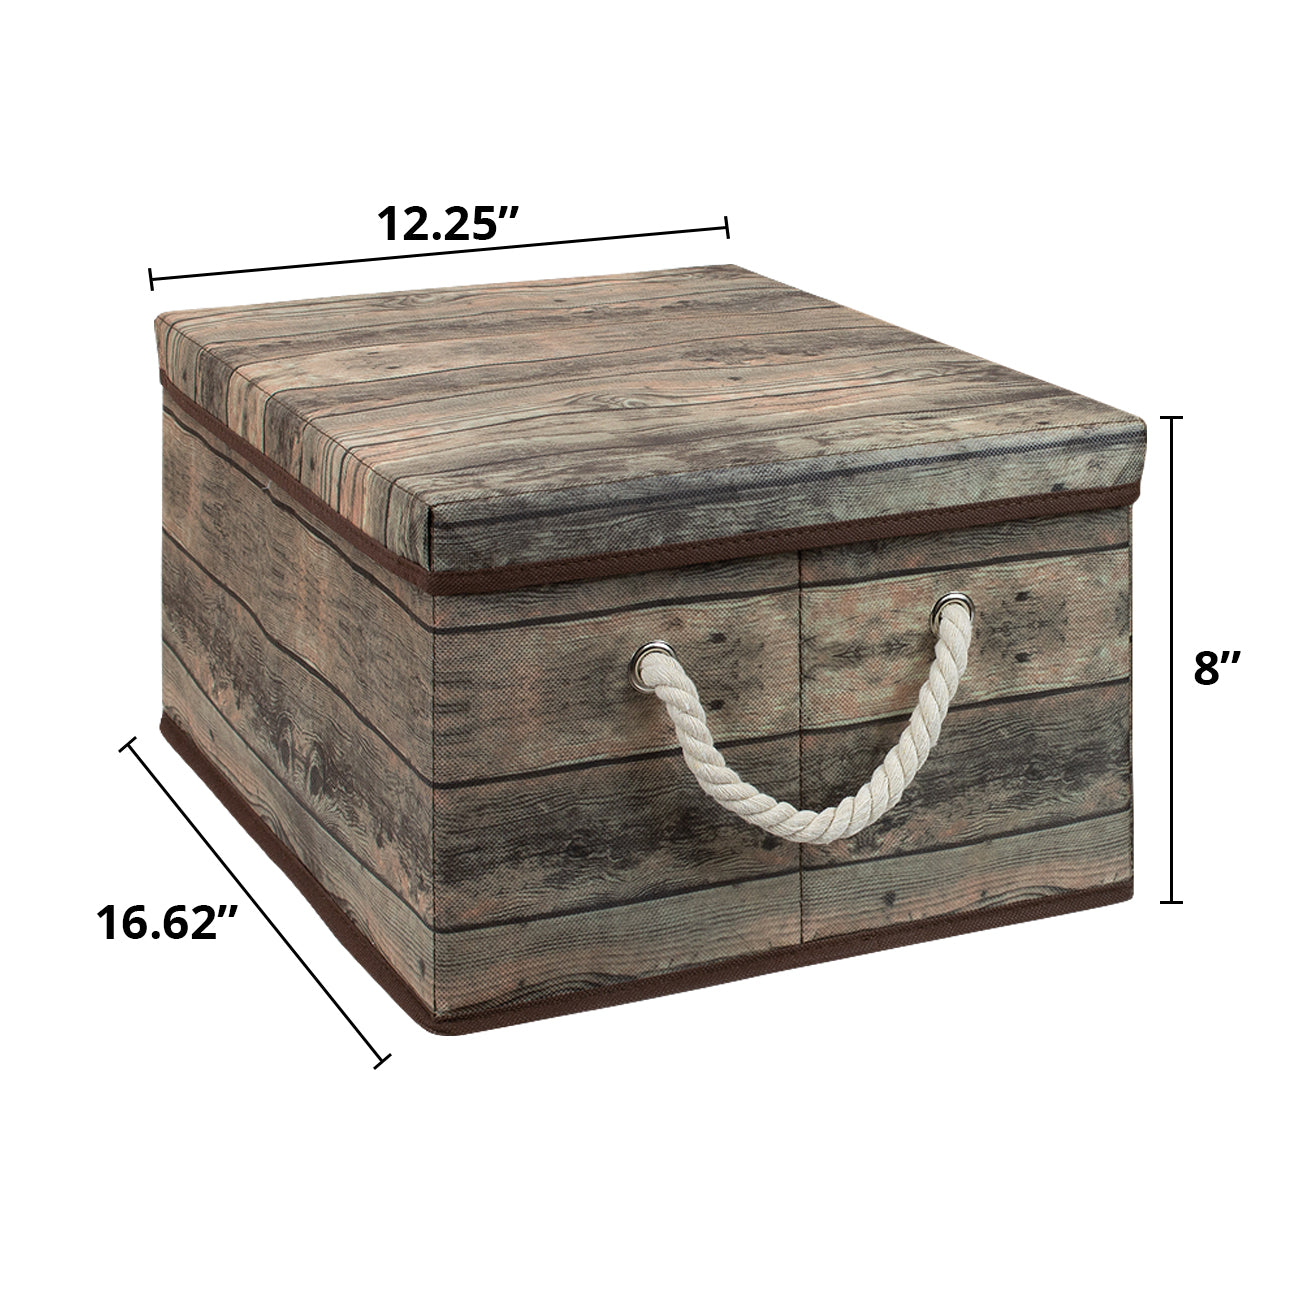 Sorbus Unfinished Wood Crates Organizer Bins Wooden Box Cabinet Containers Natural